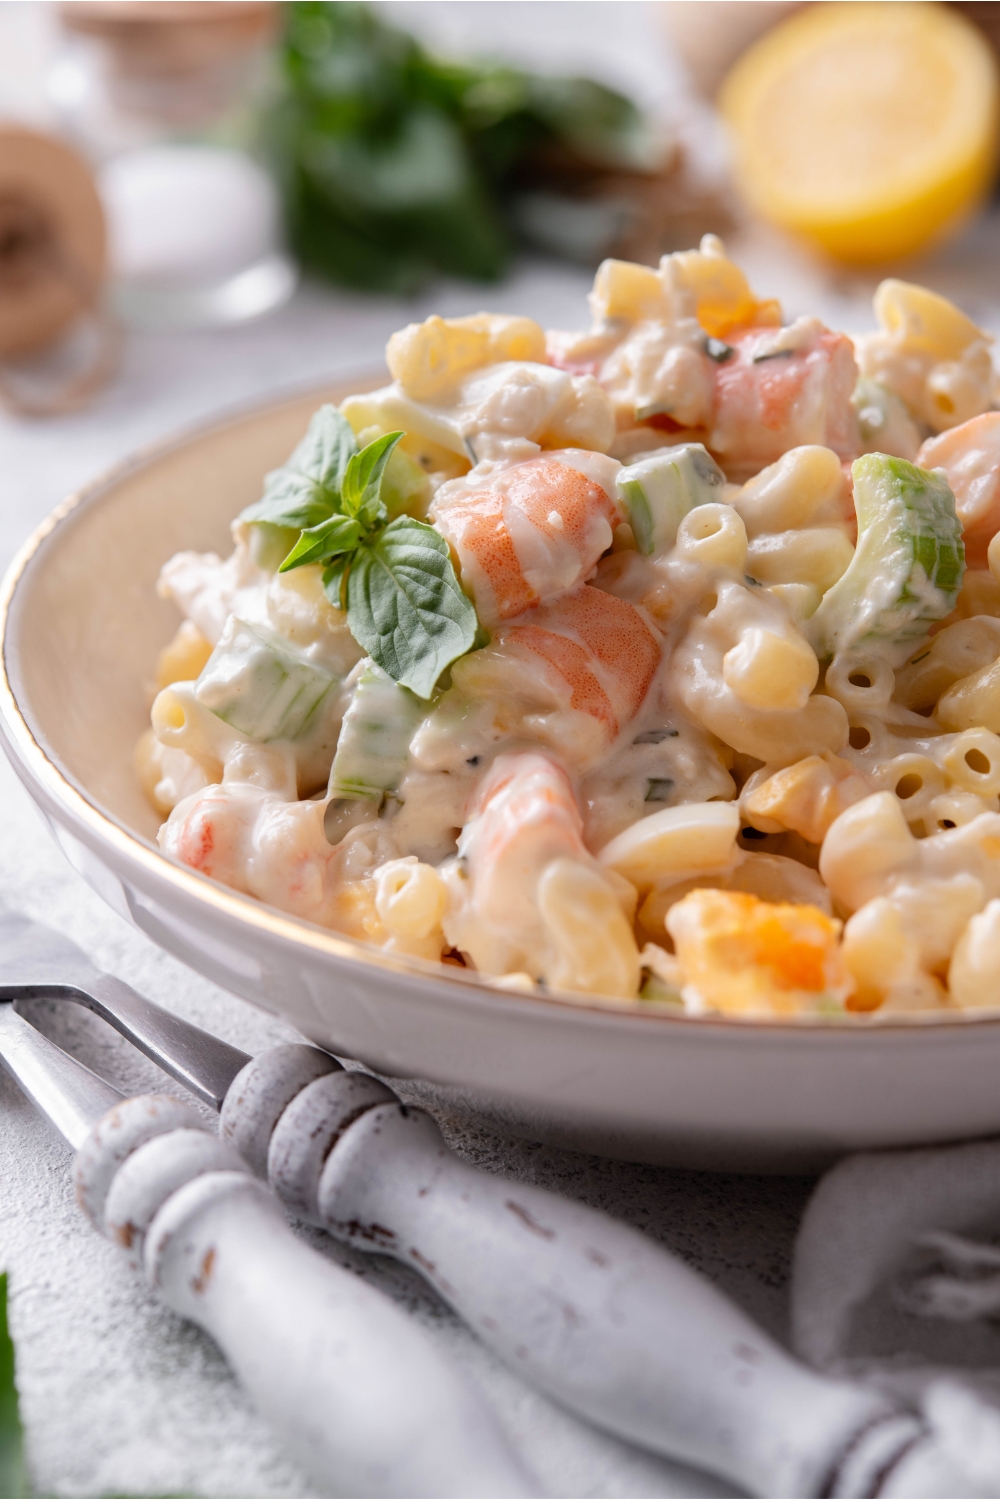 Close up of a bowl of seafood pasta salad with macaroni noodles and large chunks of shrimp and celery.